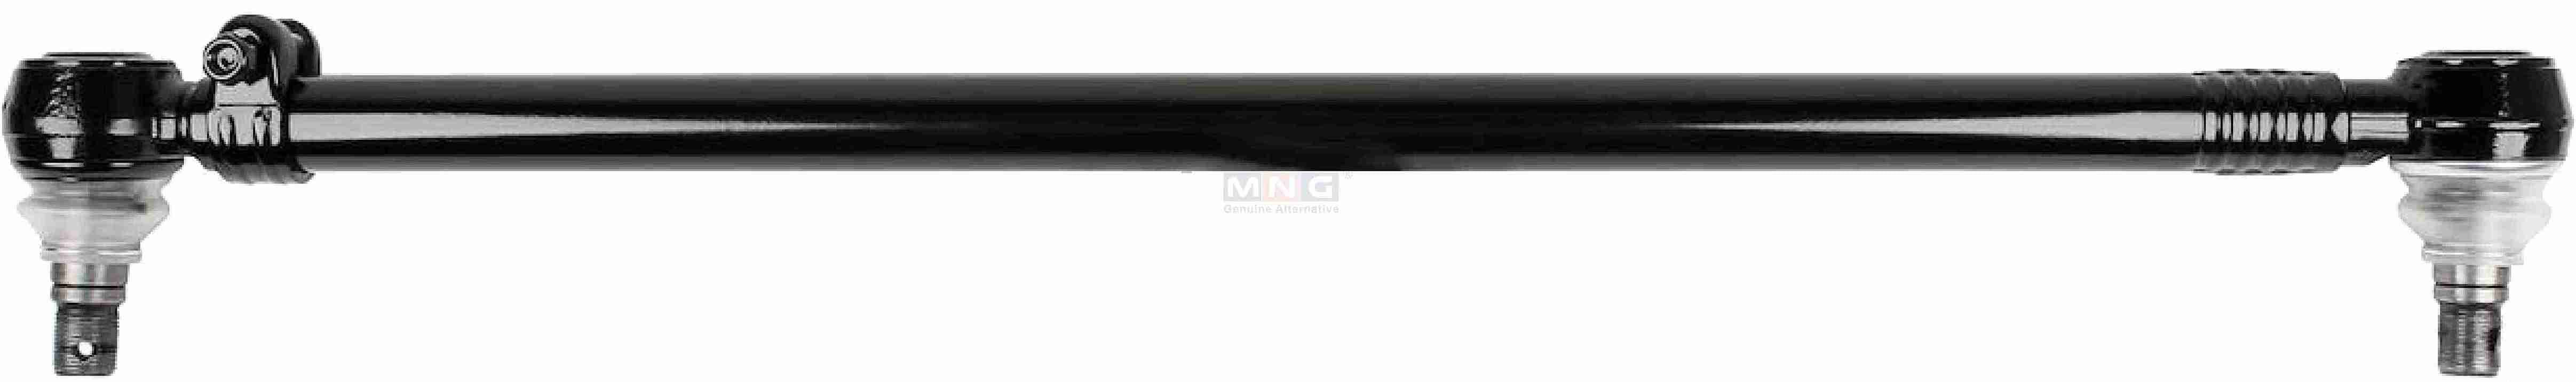 98469650-MNG-DRAG-LINK-IVECO